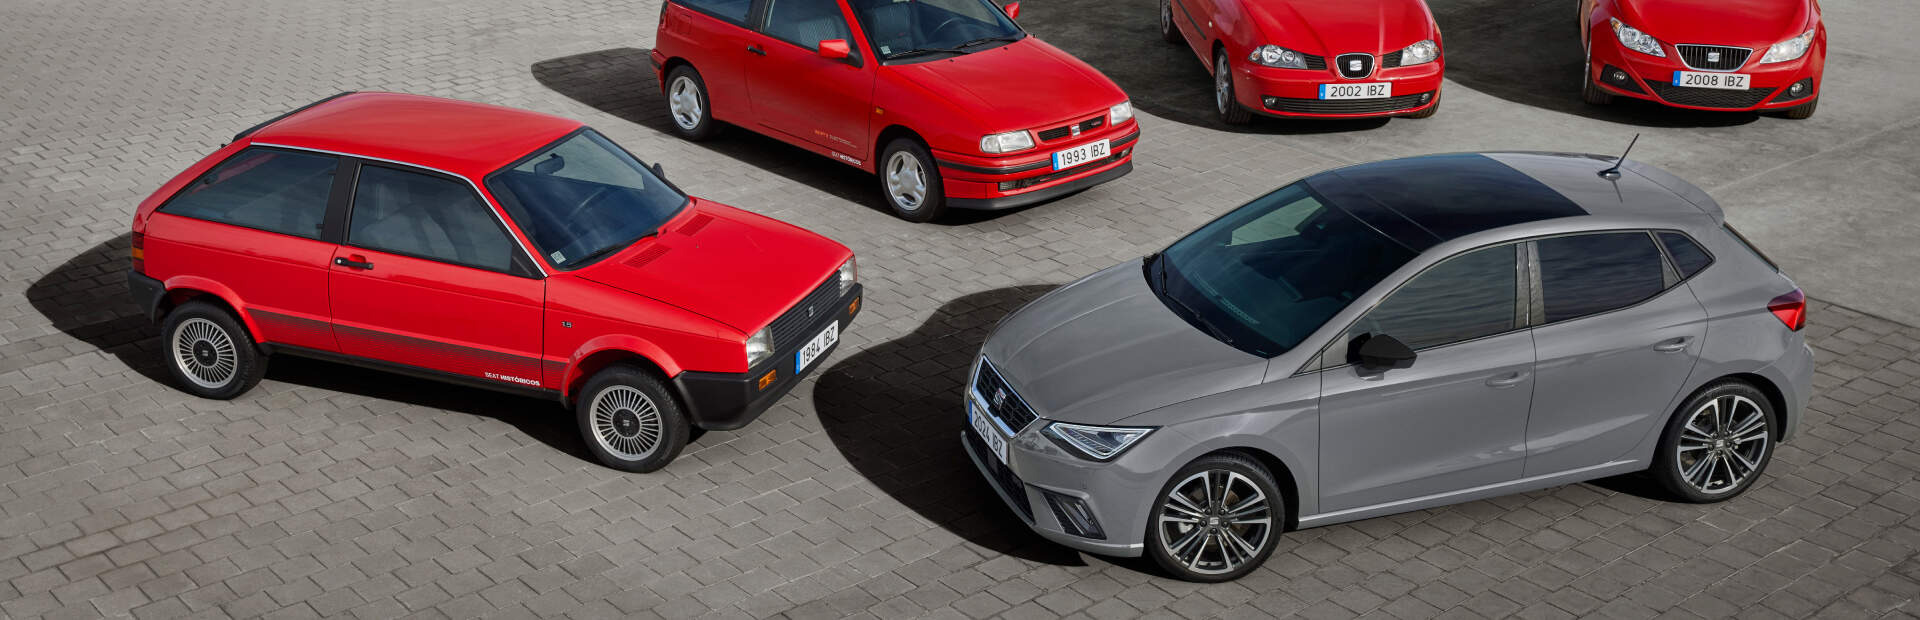 Seat Ibiza Gains Anniversary Limited Edition, But Its Future Doesn't Look  Bright